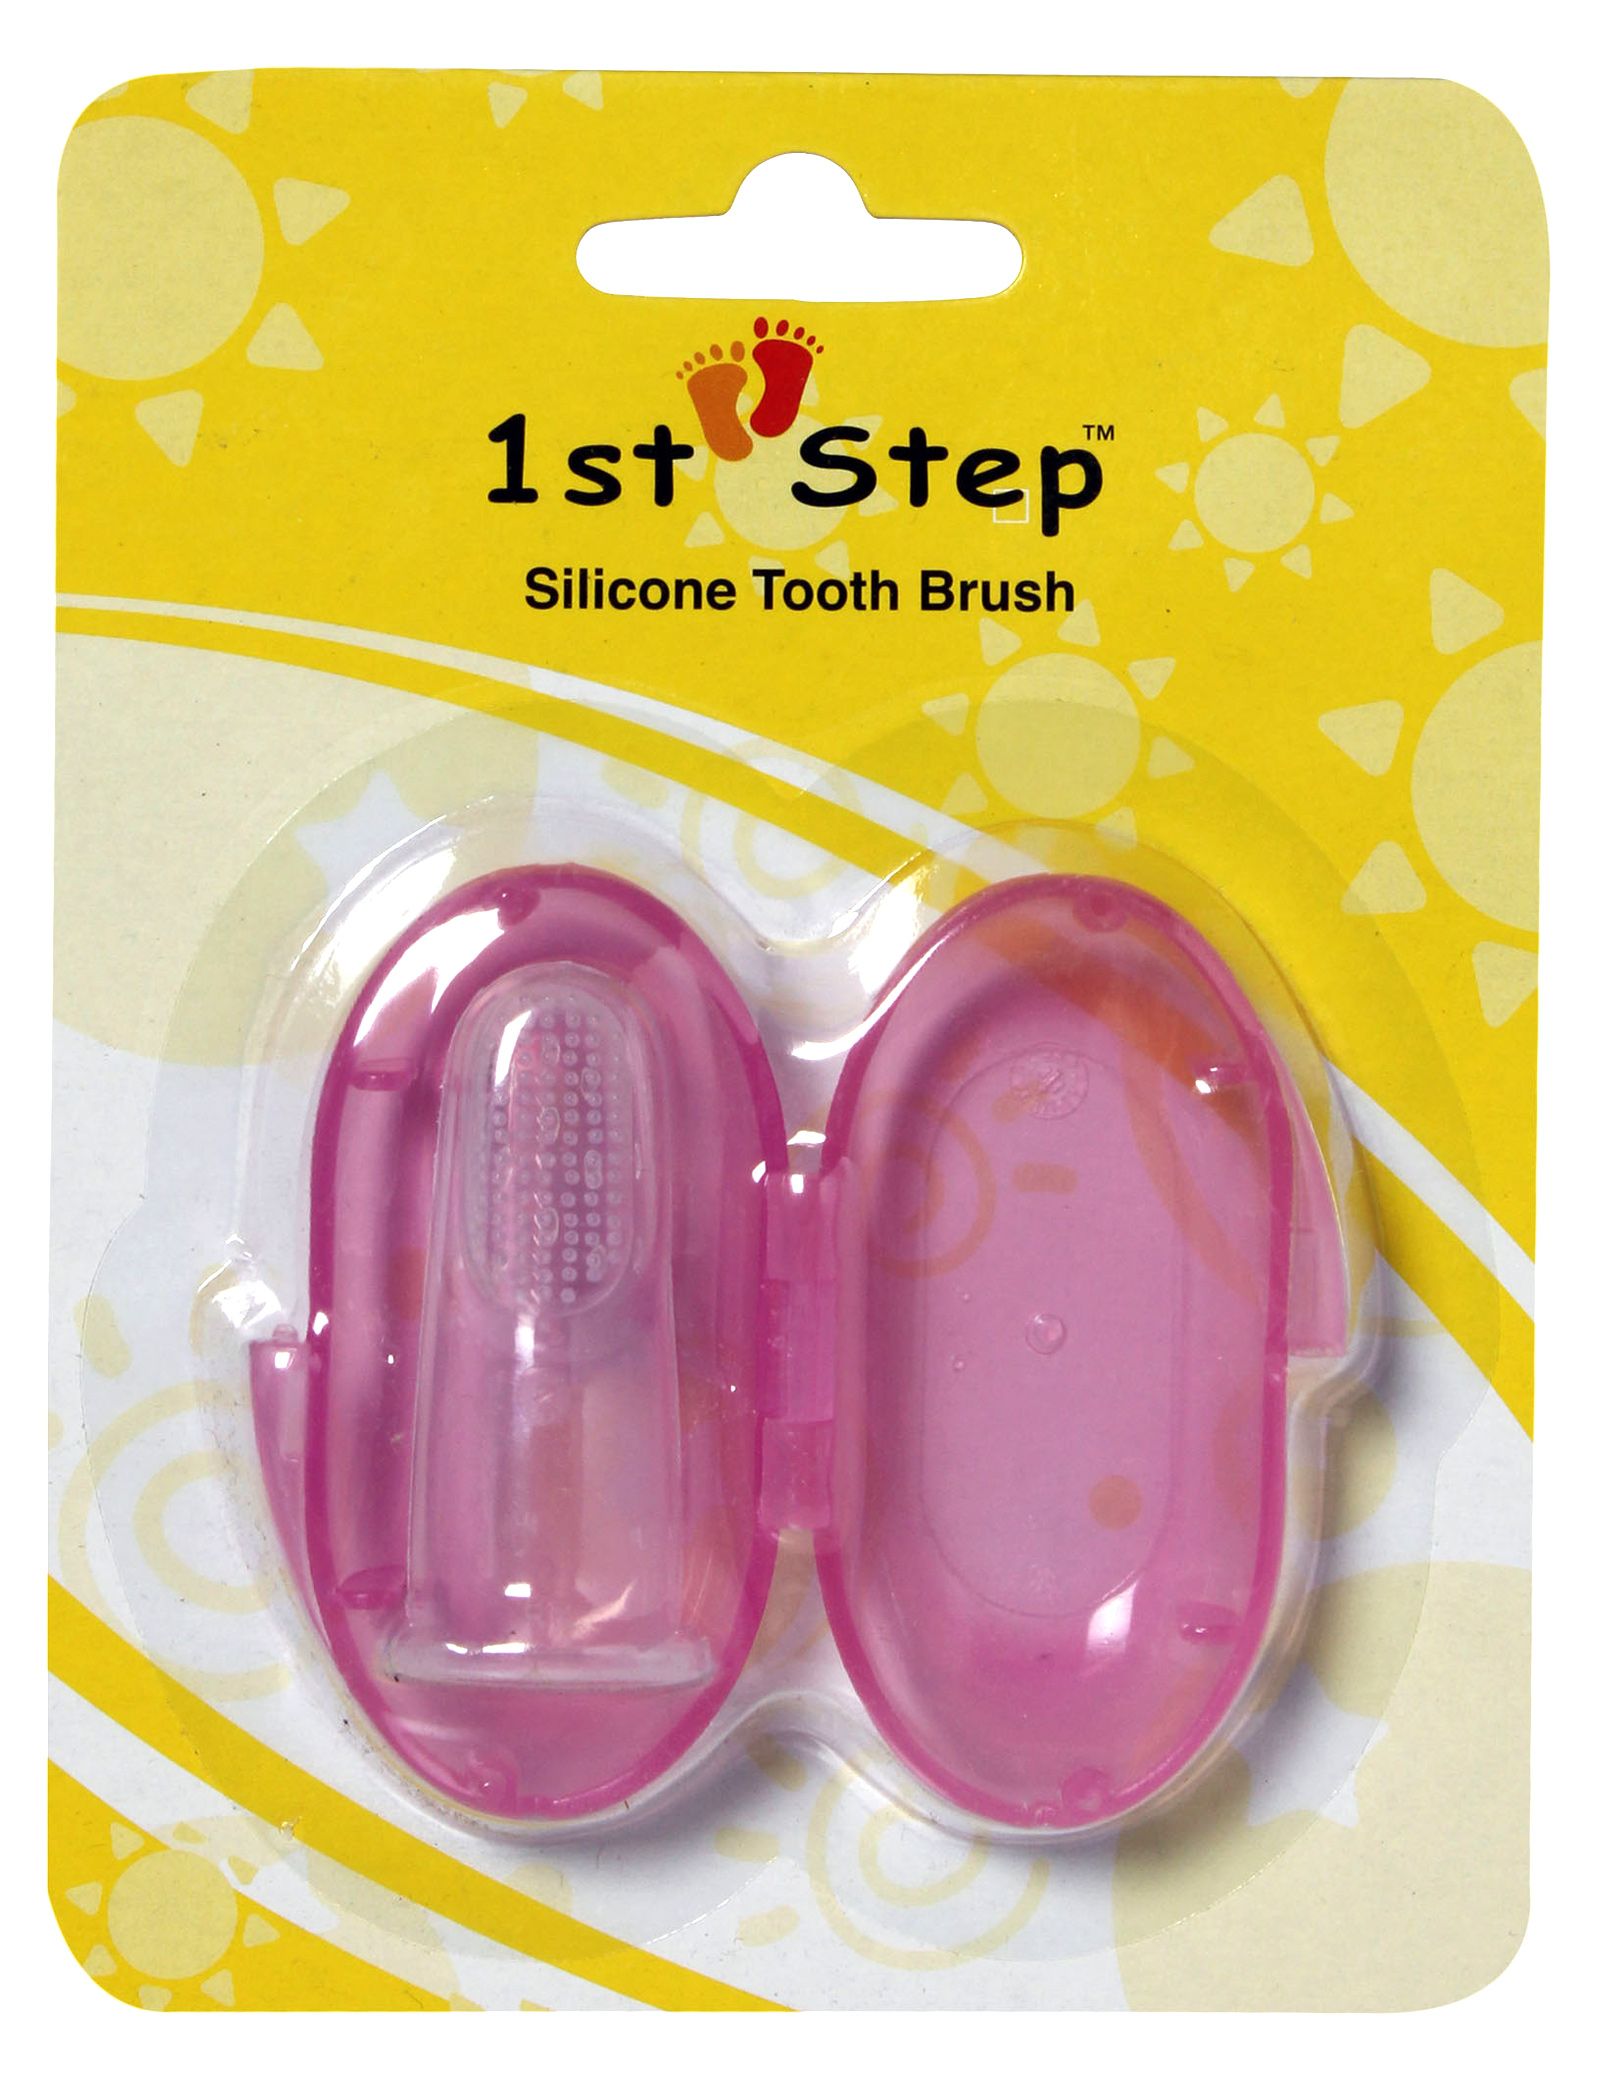 1st Step Silicone Tooth Brush